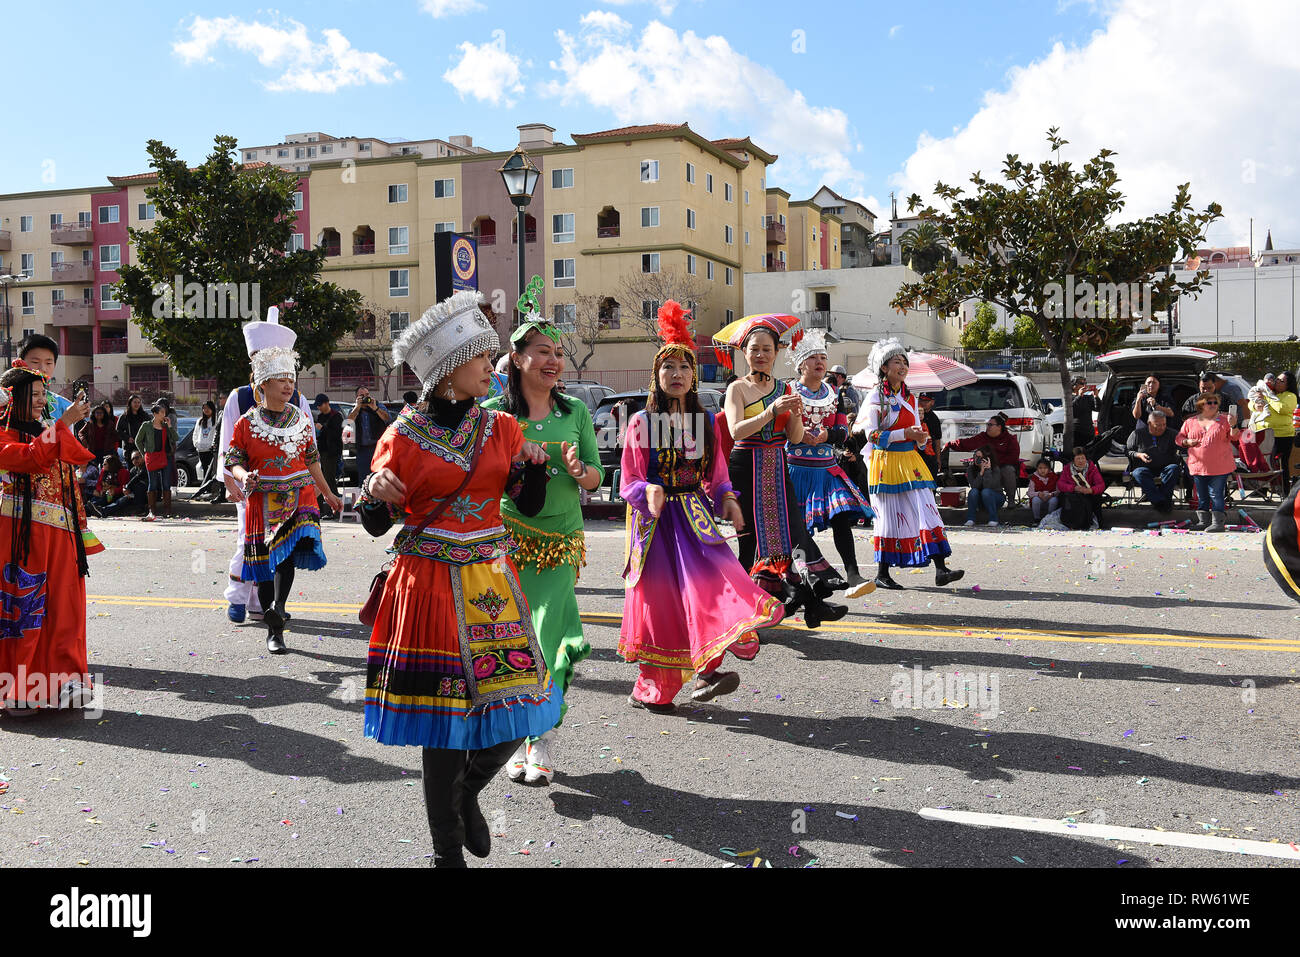 LOS ANGELES - FEBRUARY 9, 2019: Thai Community Dancers in Colorful Costumes at the Chinese New Year Parade in Los Angeles. Stock Photo